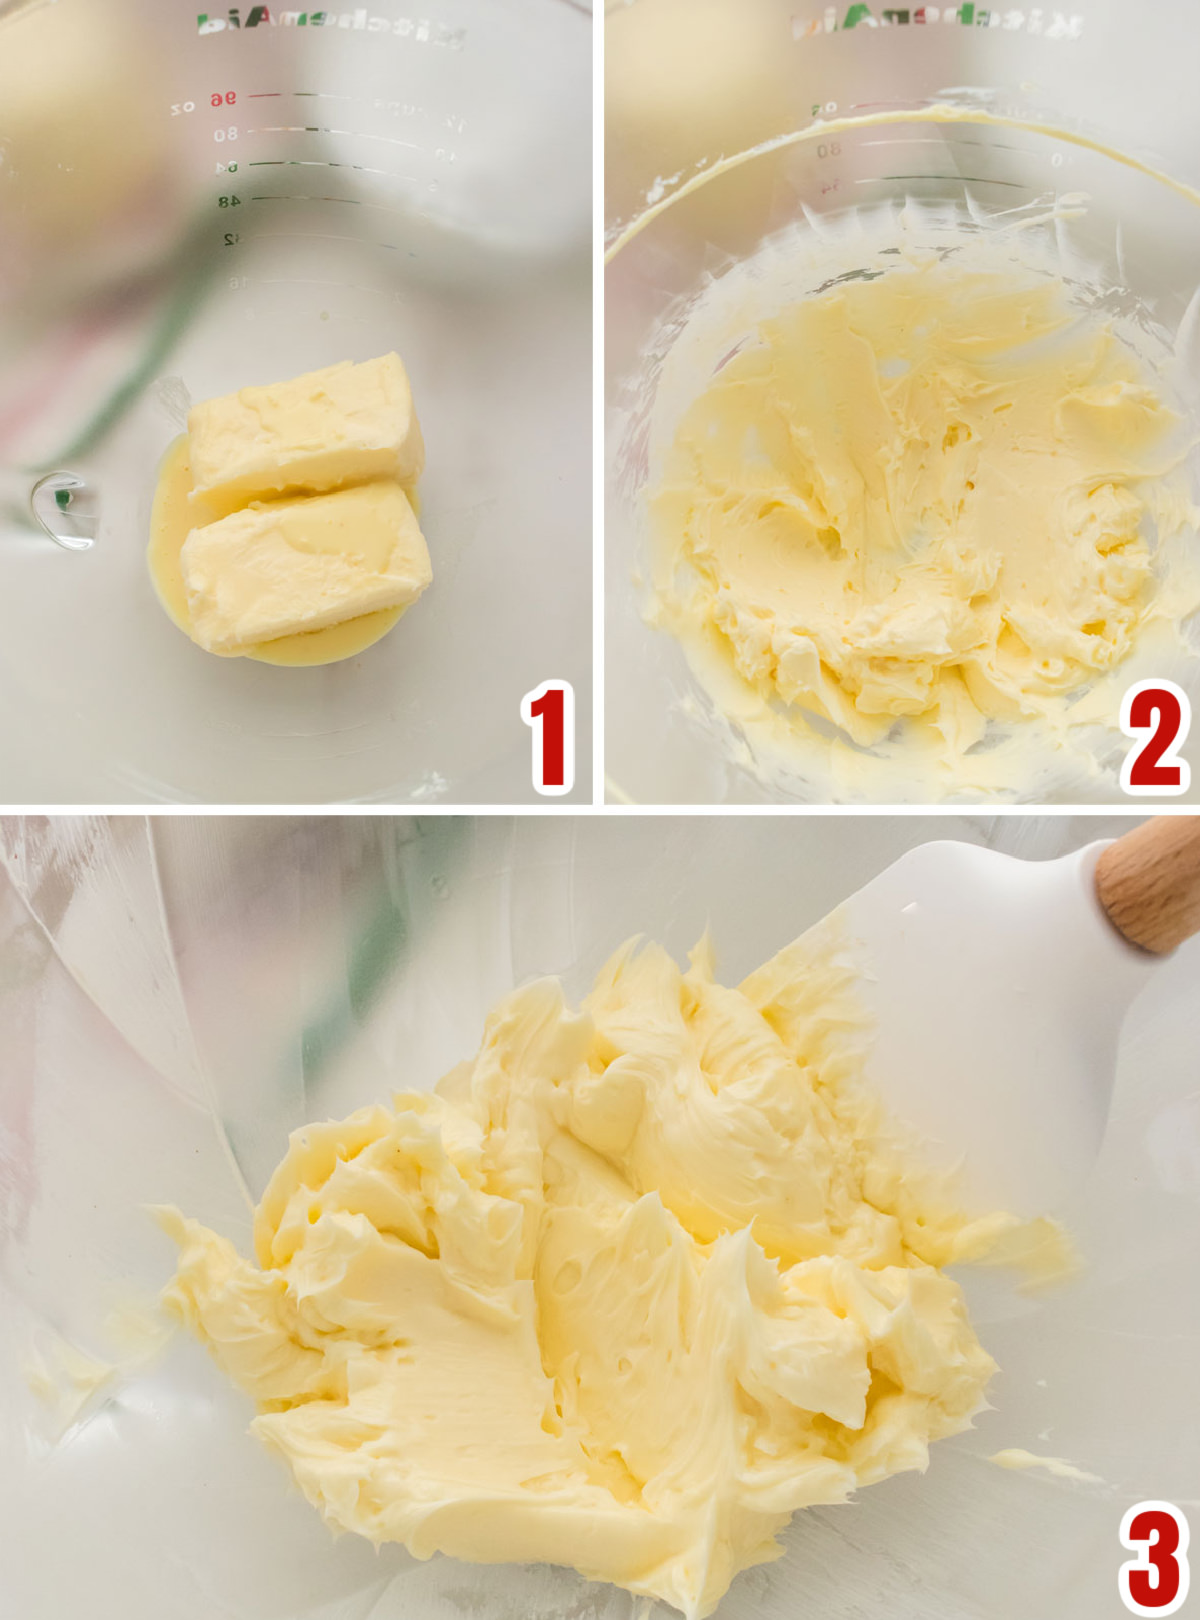 Collage image showing the steps for mixing the butter and the eggnog together for the best frosting flavor.